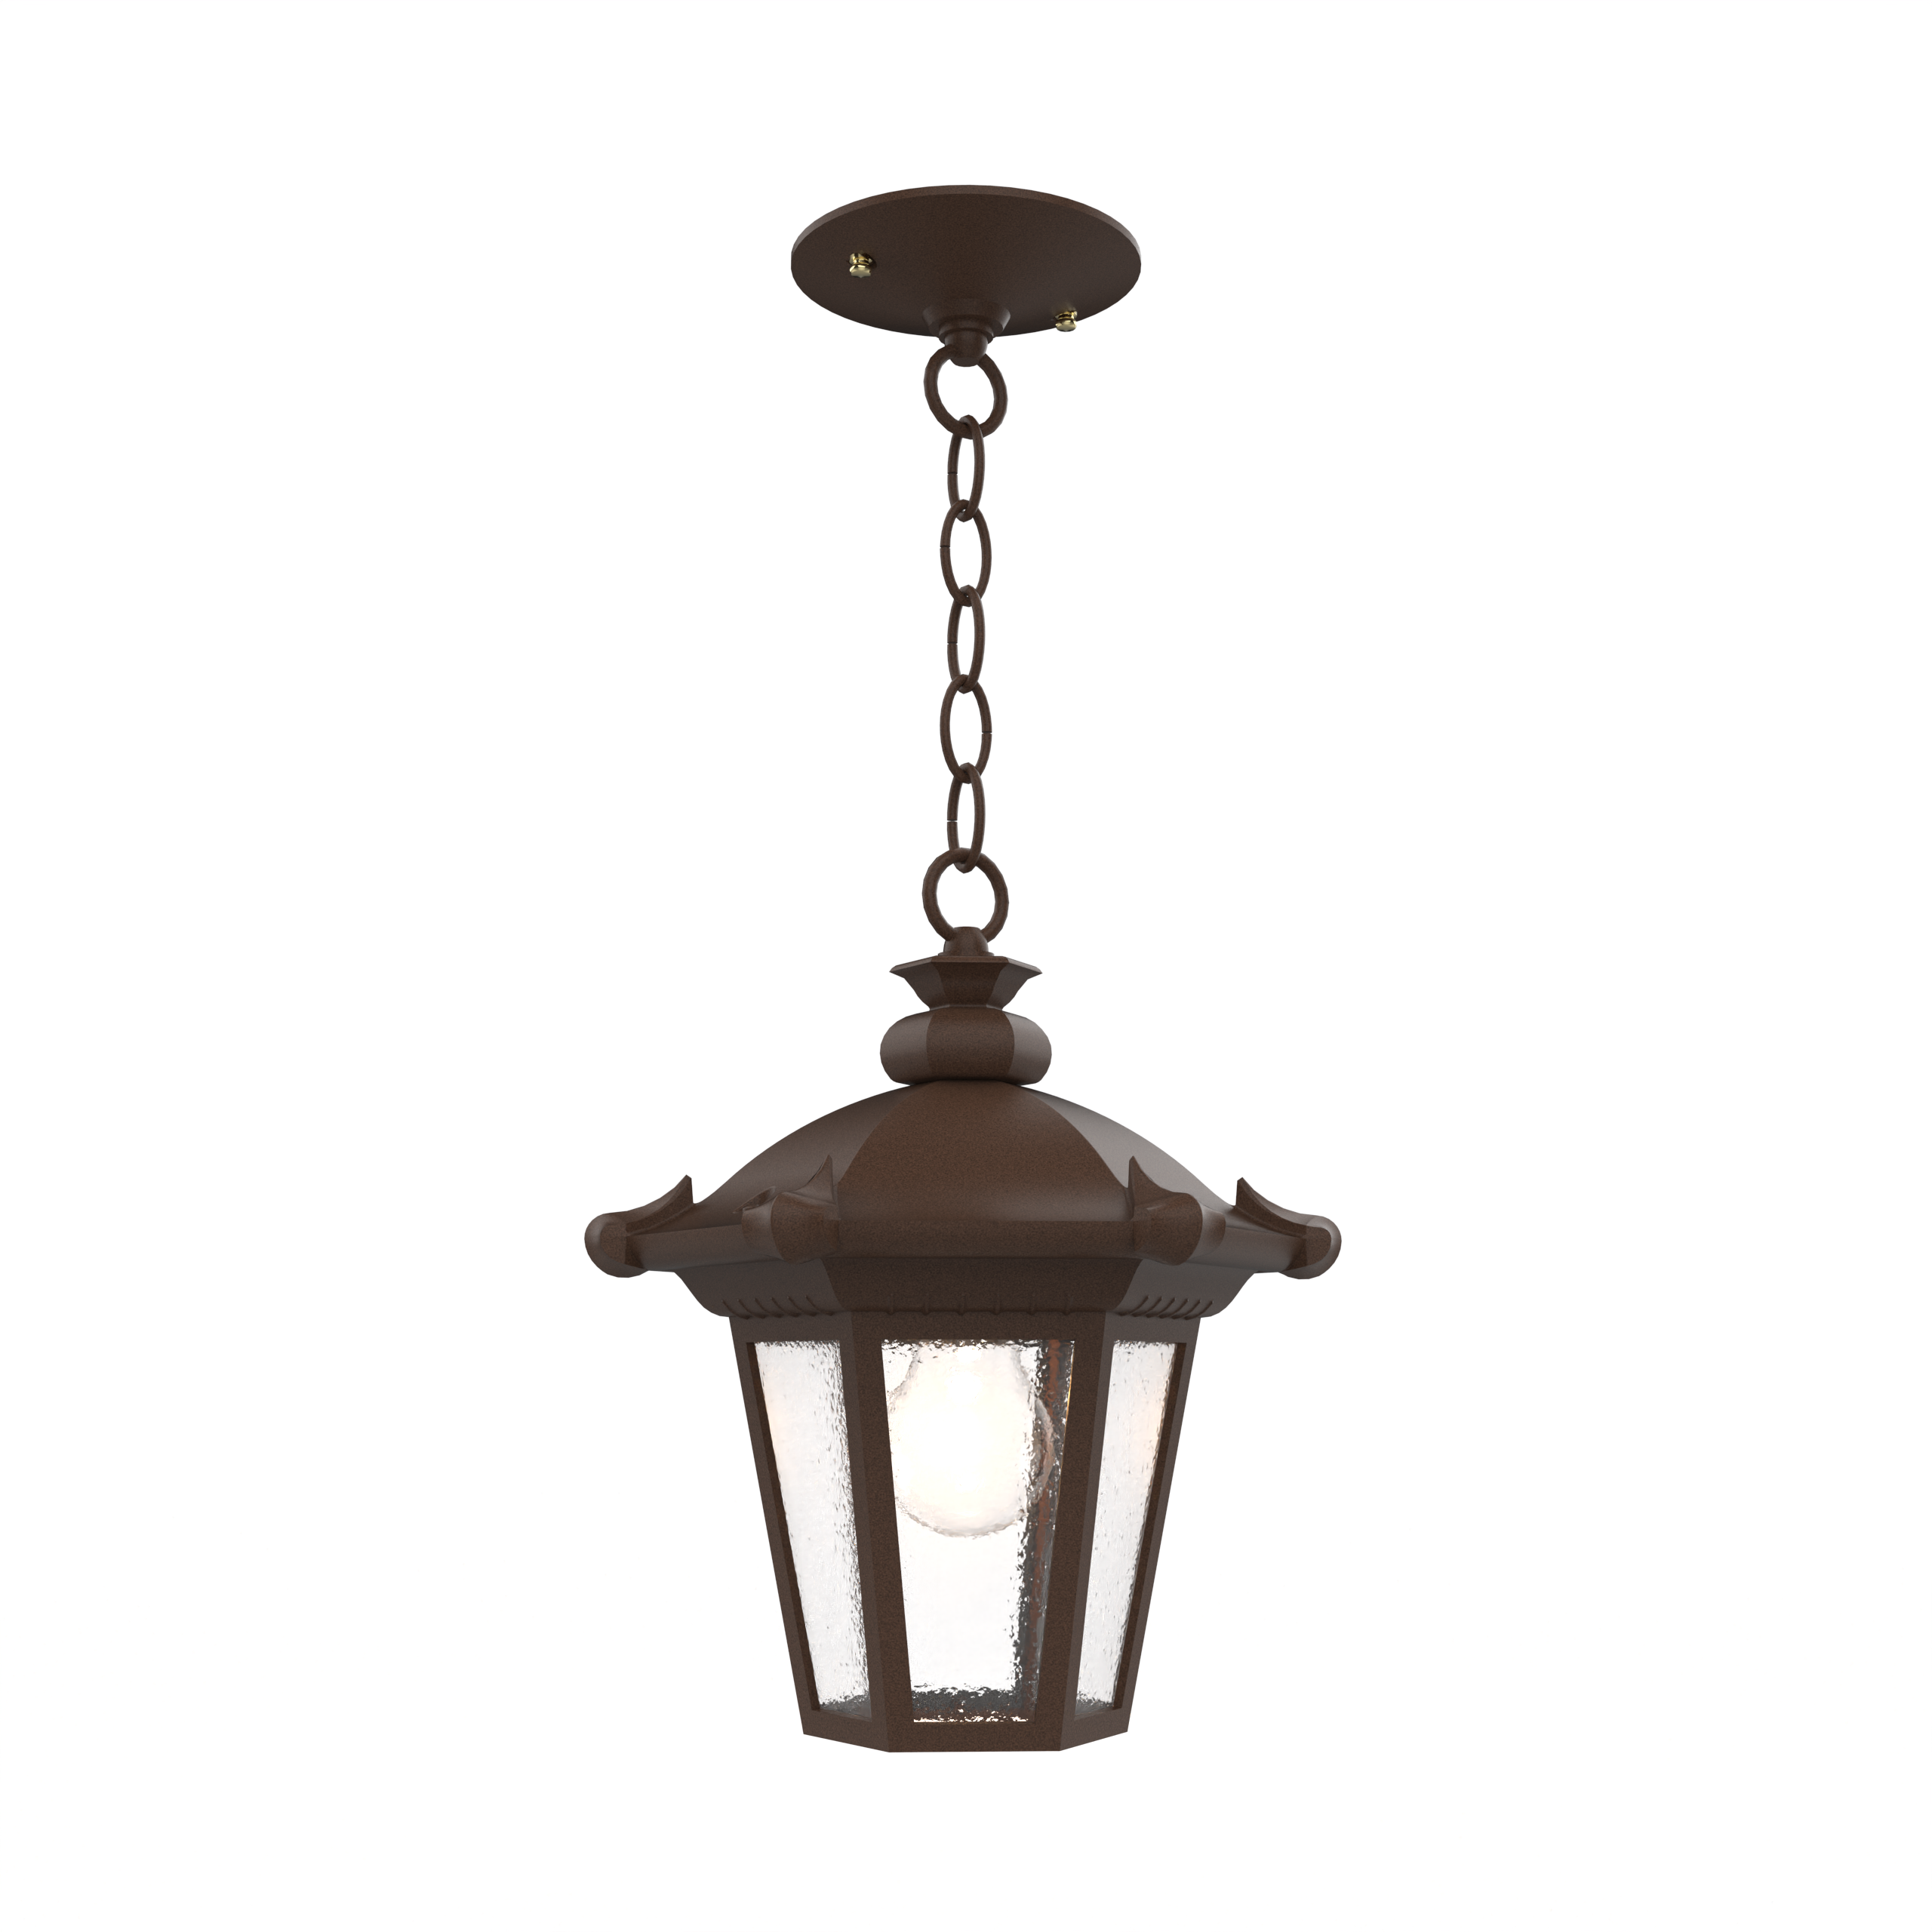 Montpellier - Ceiling mounting with chain open bottom small format - 13350